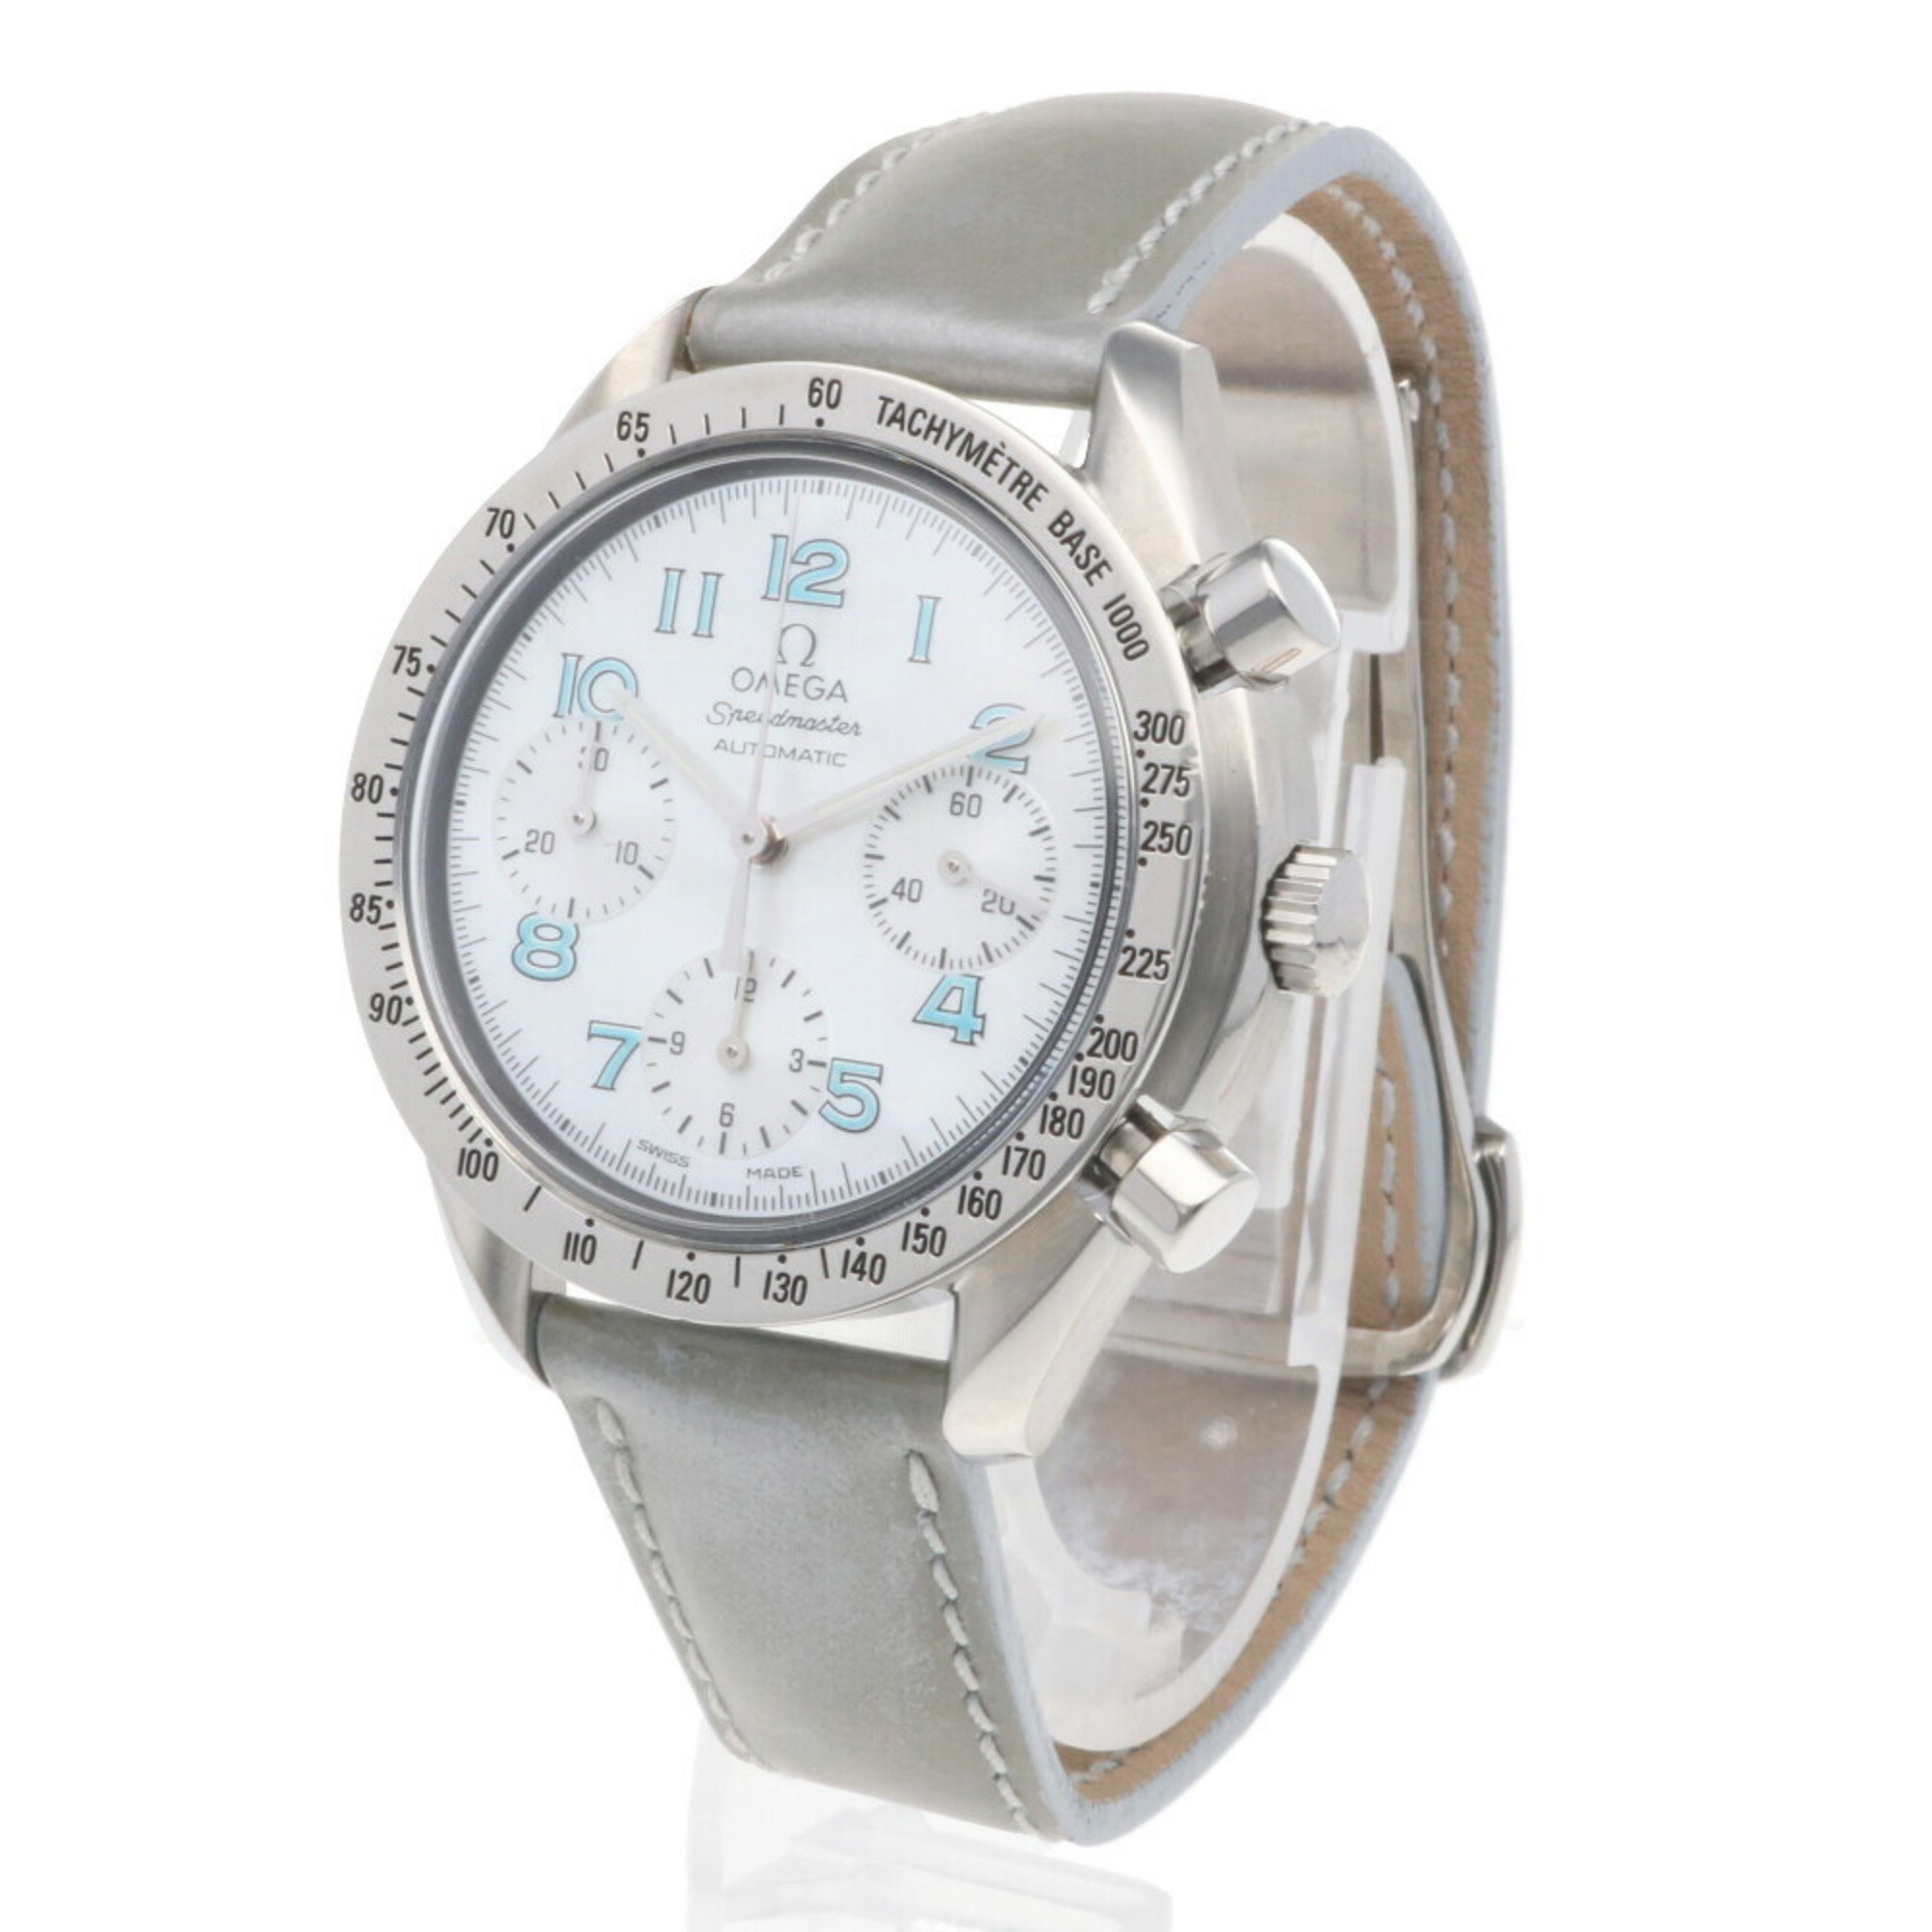 OMEGA Speedmaster Watch Stainless Steel 38027153 Automatic Women's White Shell